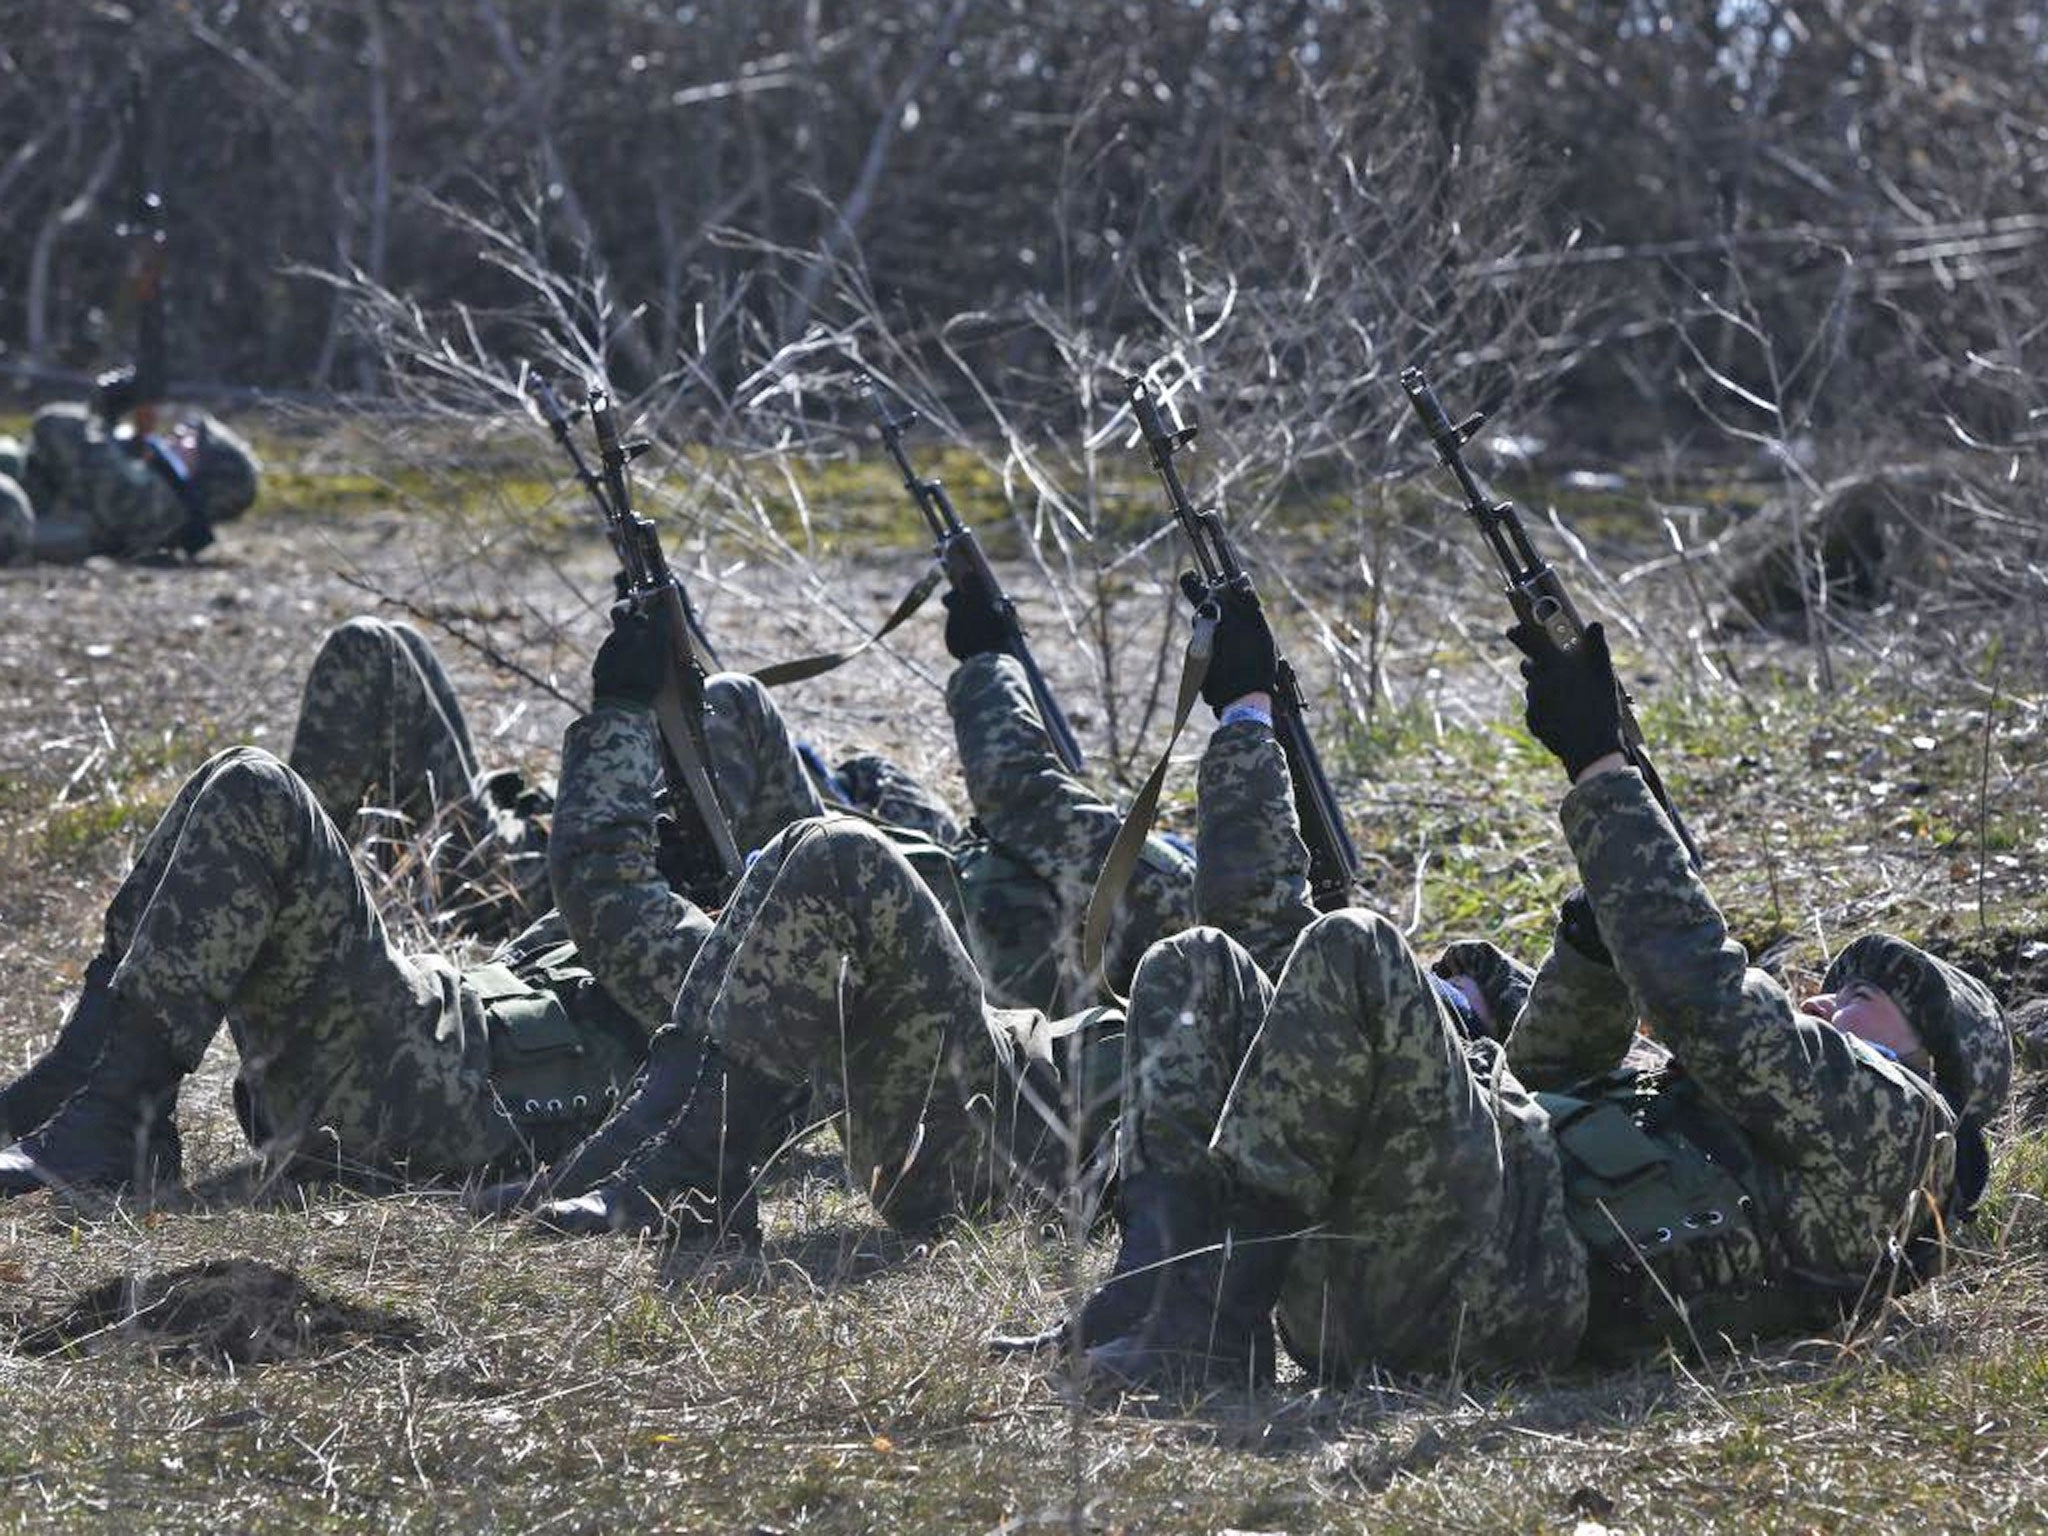 Ukrainian border guards perform an exercise in anti-air attack during training at a military camp in the village of Alekseyevka on the Ukrainian-Russian border, eastern Ukraine